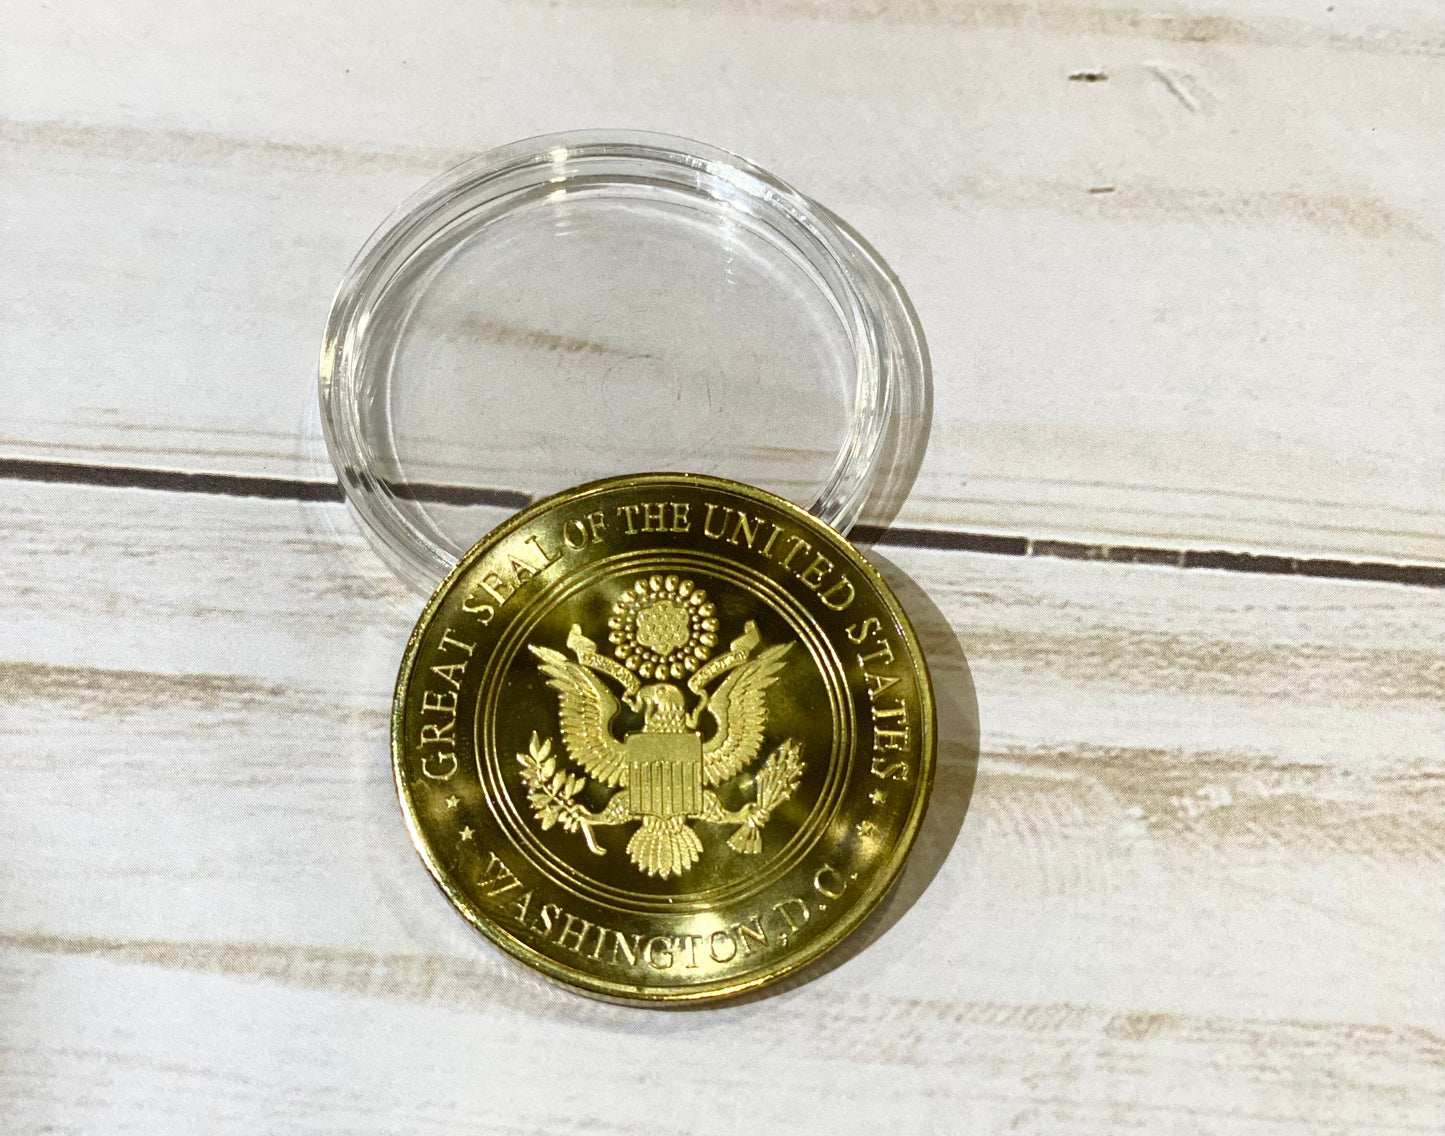 Salute to your Service - Military Thank You Note and Challenge Coin for Active Military